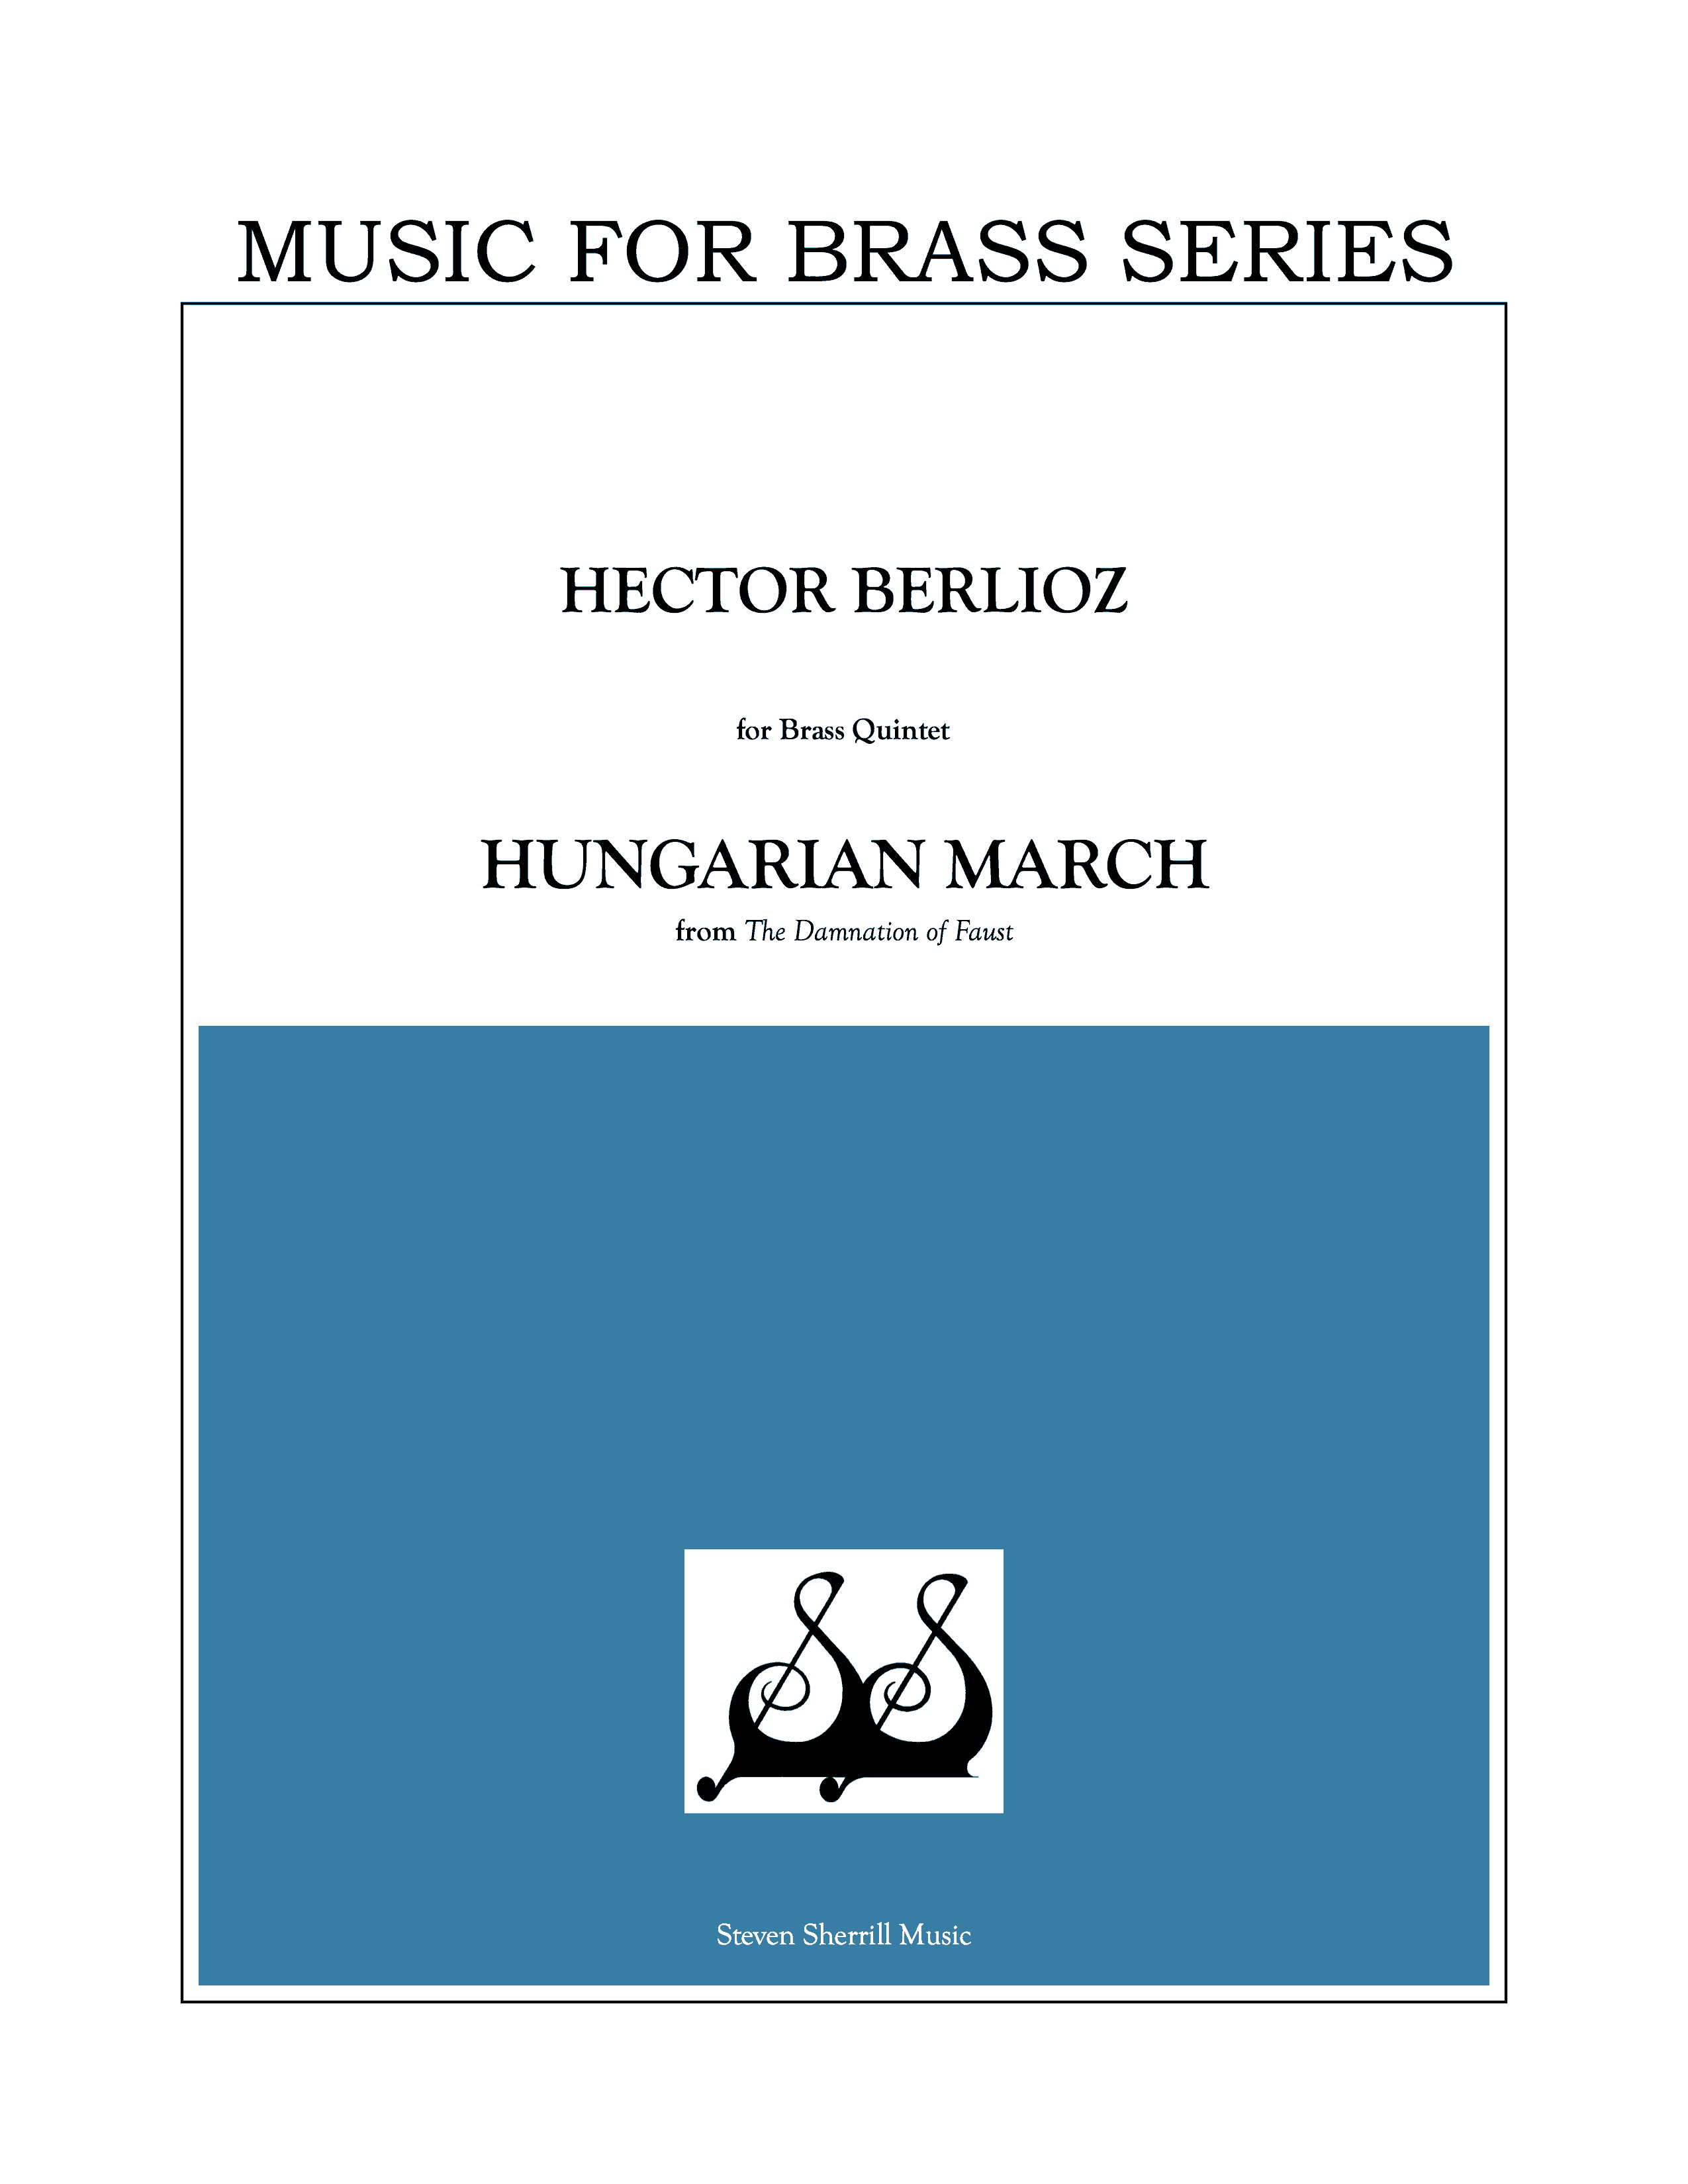 Hungarian March cover page